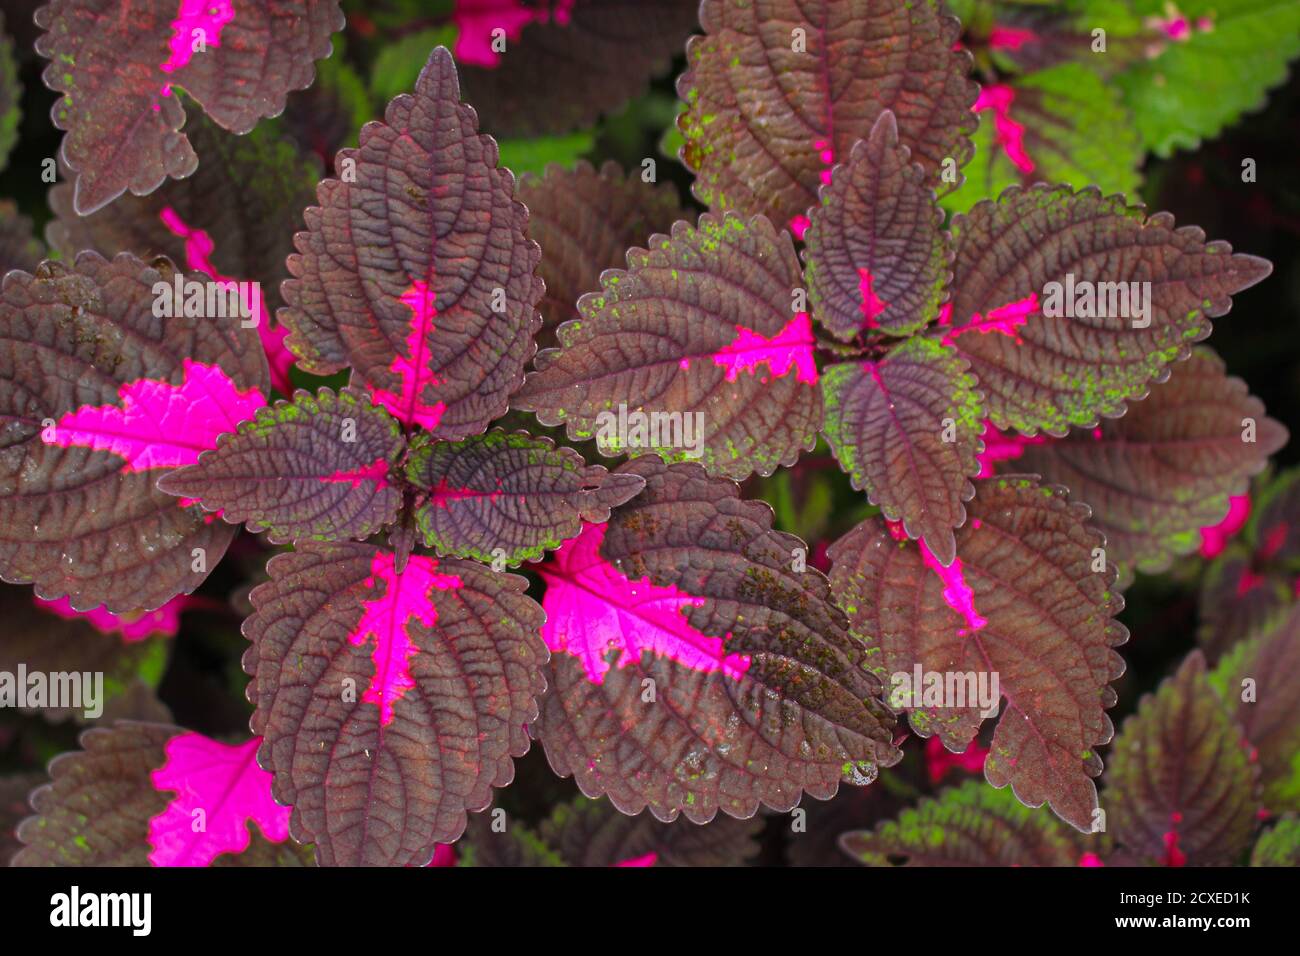 beautyful leaves,Multi colored leaves pink,purple and green color leaves growing in garden Stock Photo